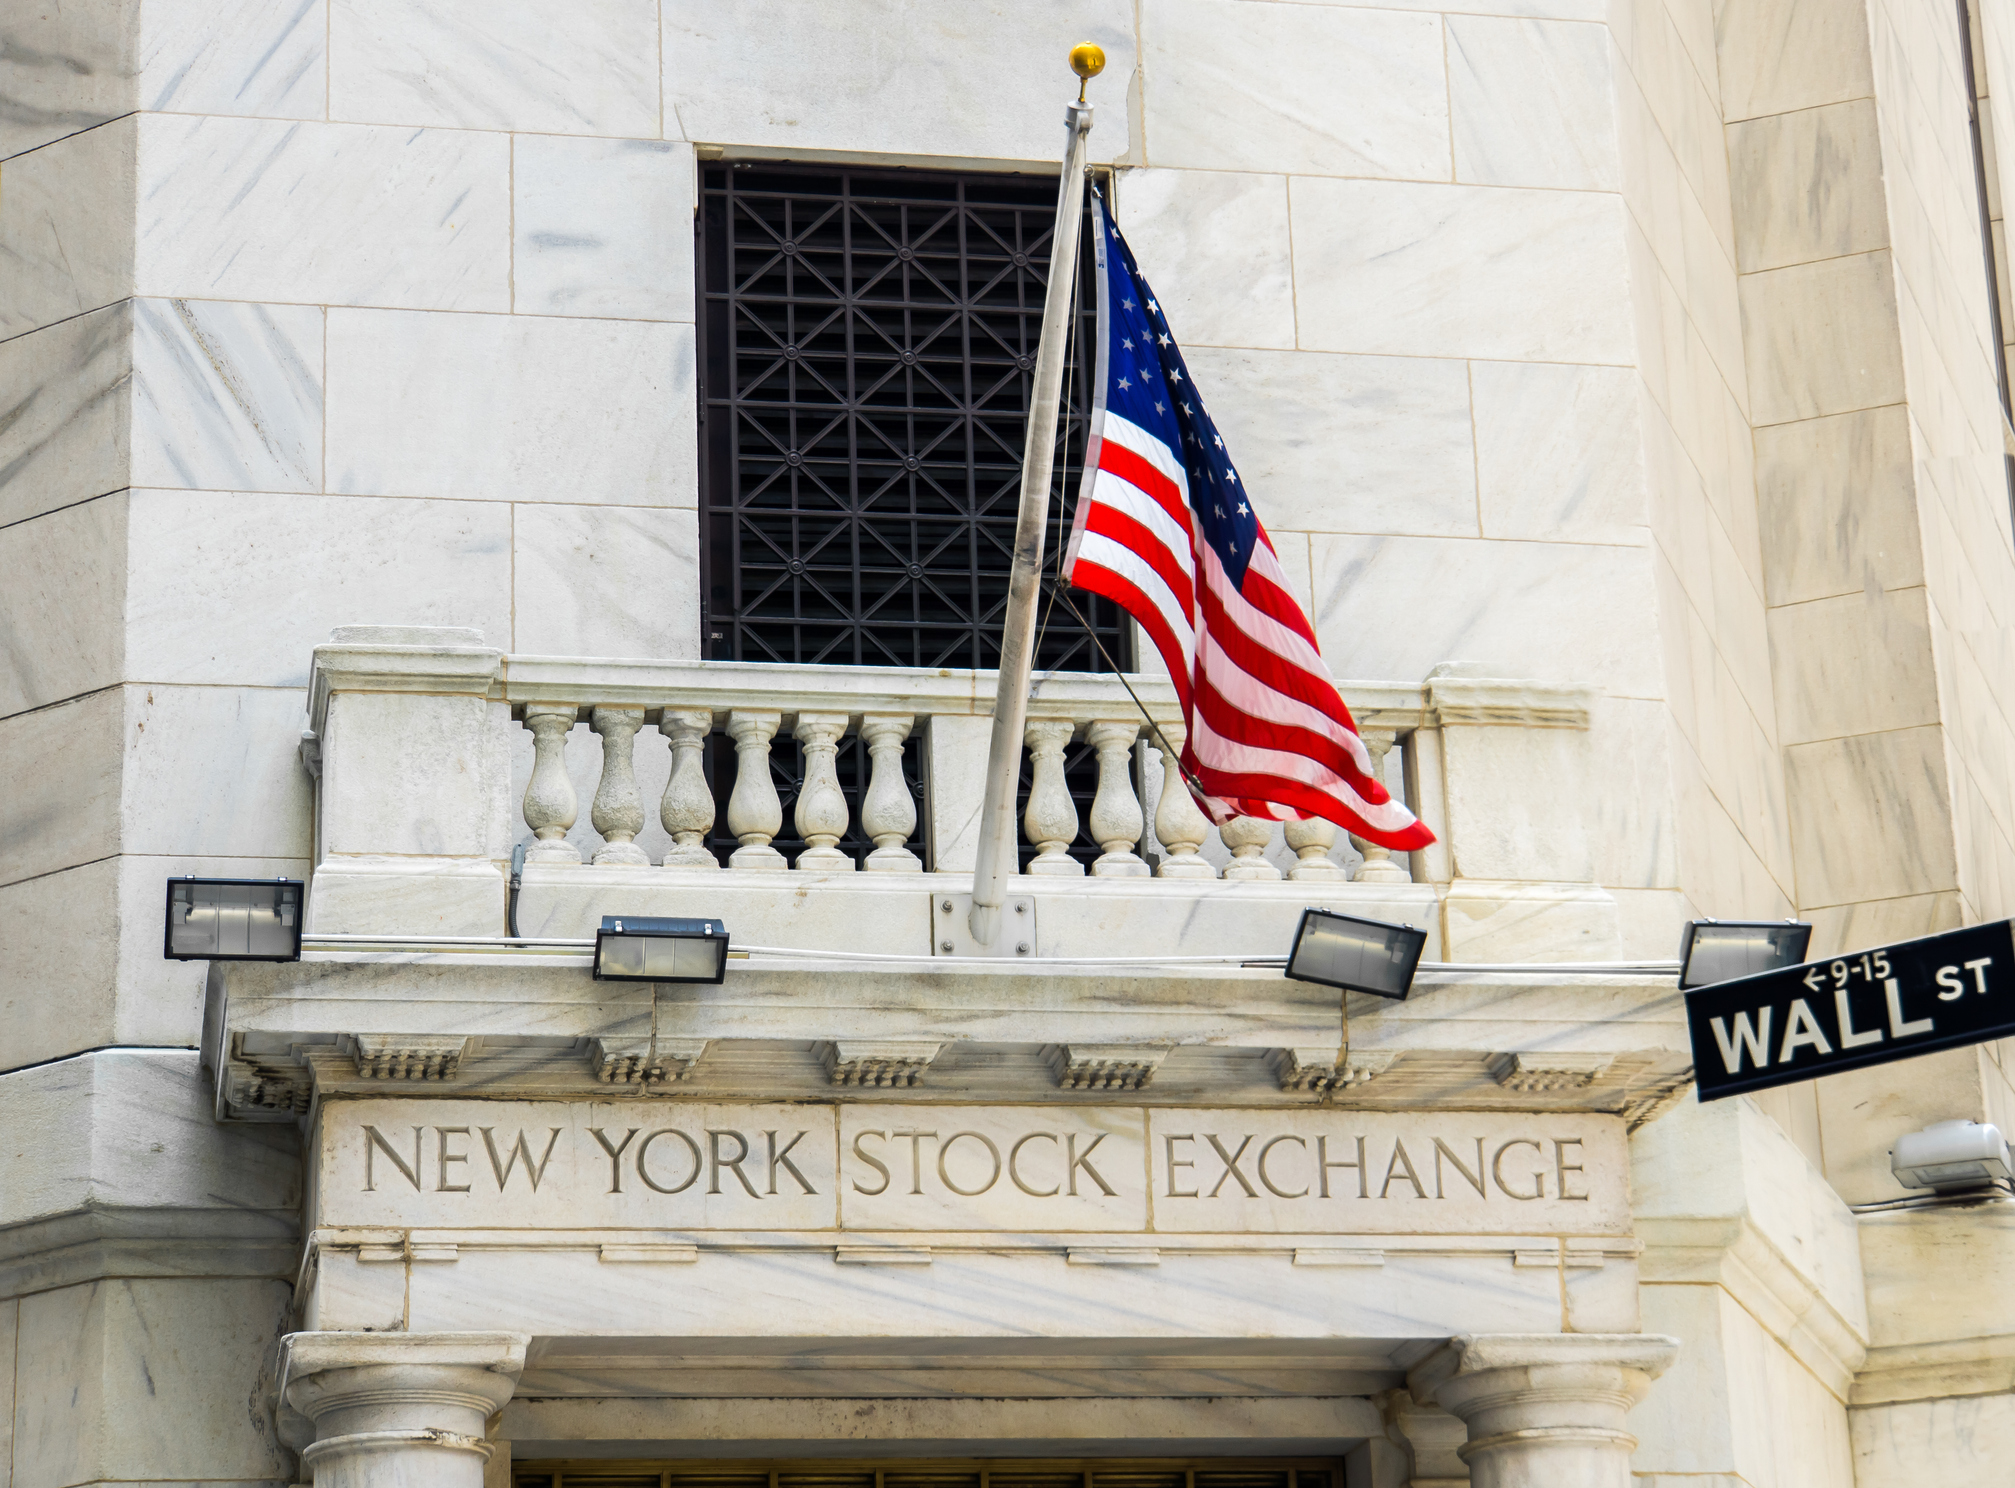 New York Stock Exchange and Wall Street